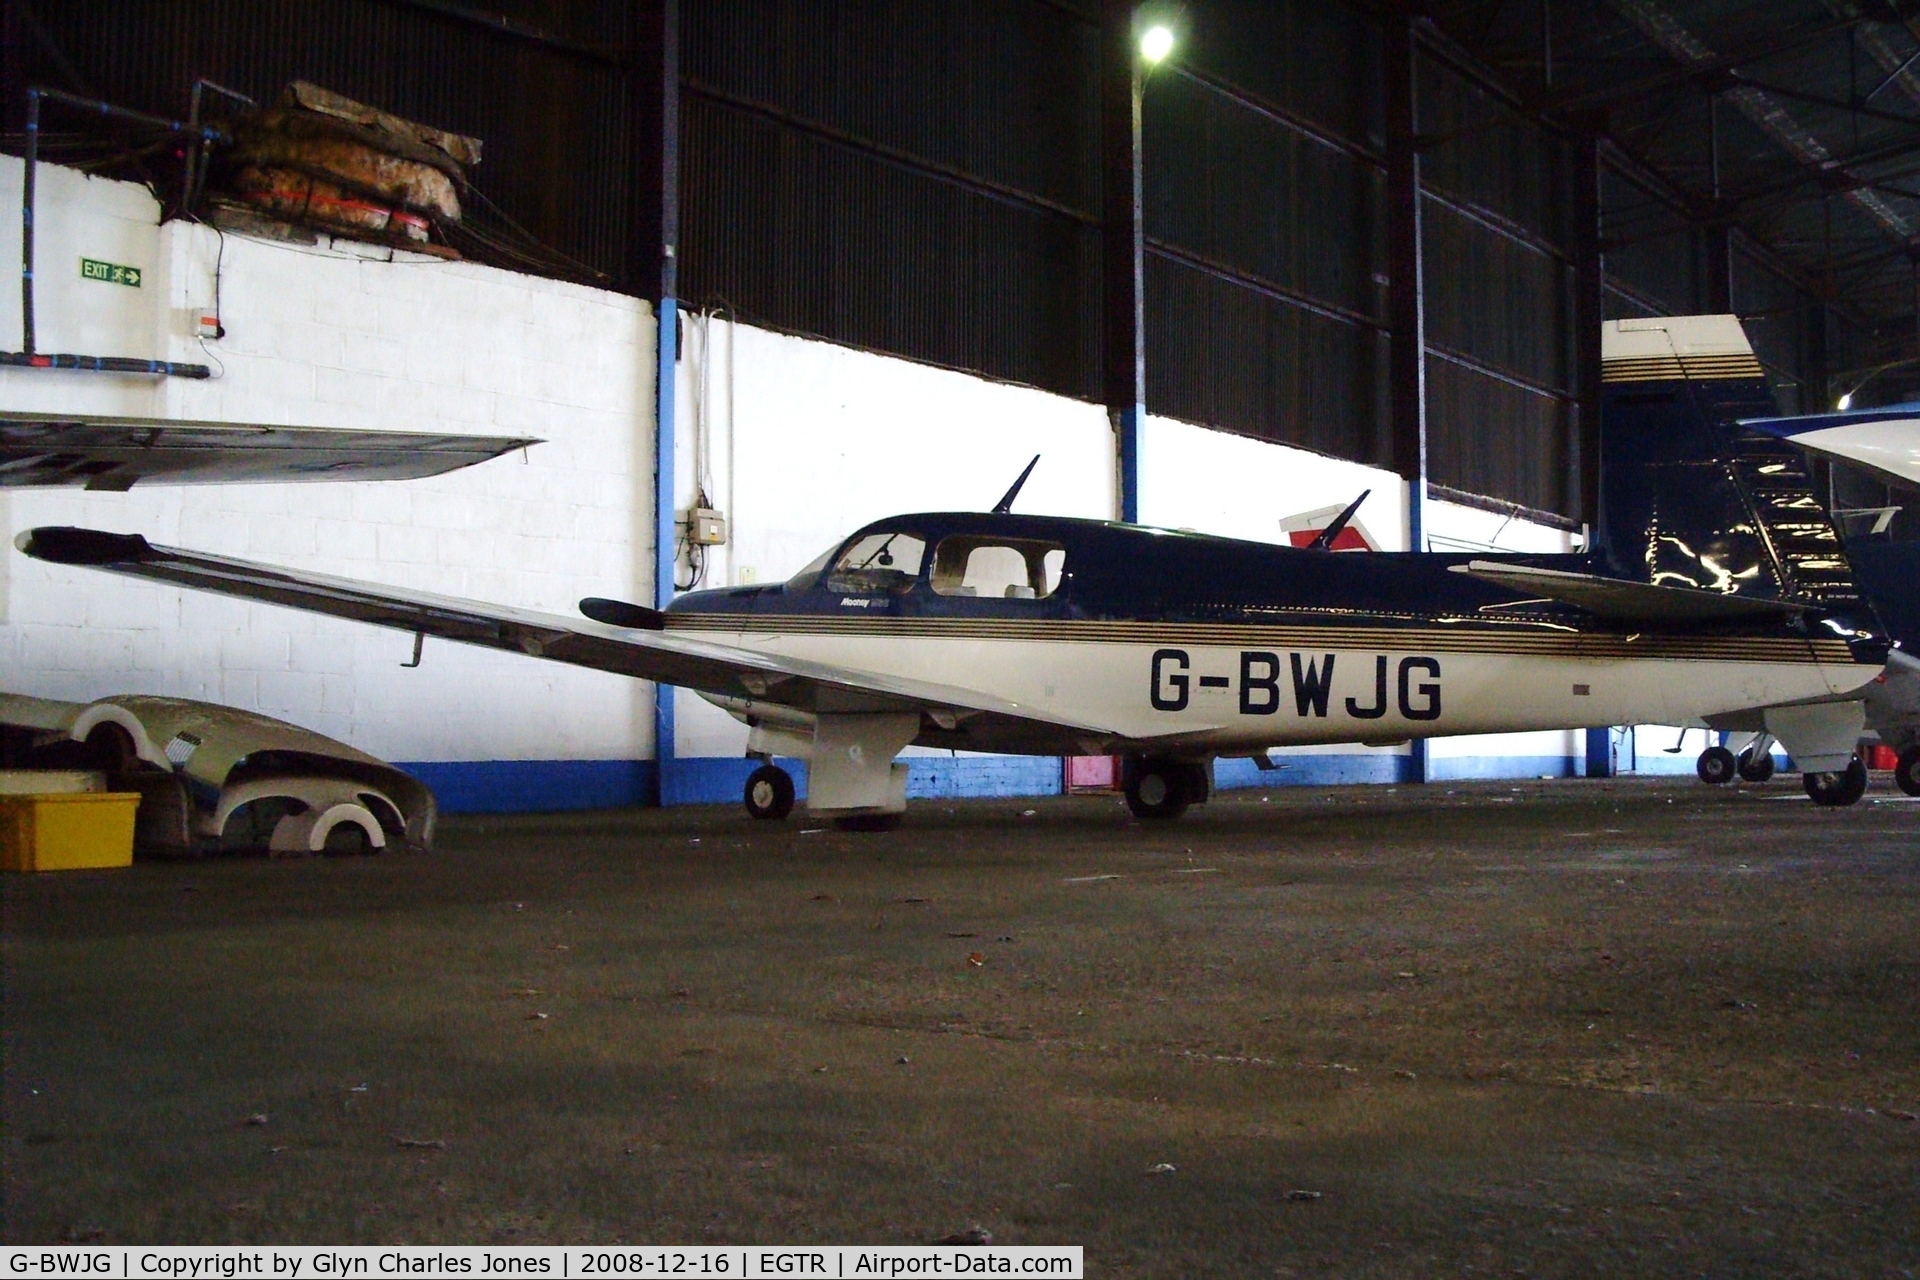 G-BWJG, 1993 Mooney M20J 201 C/N 24-3319, With thanks to the engineer of Metair who granted me authority to take photos in the hangar. Previously N1083P.